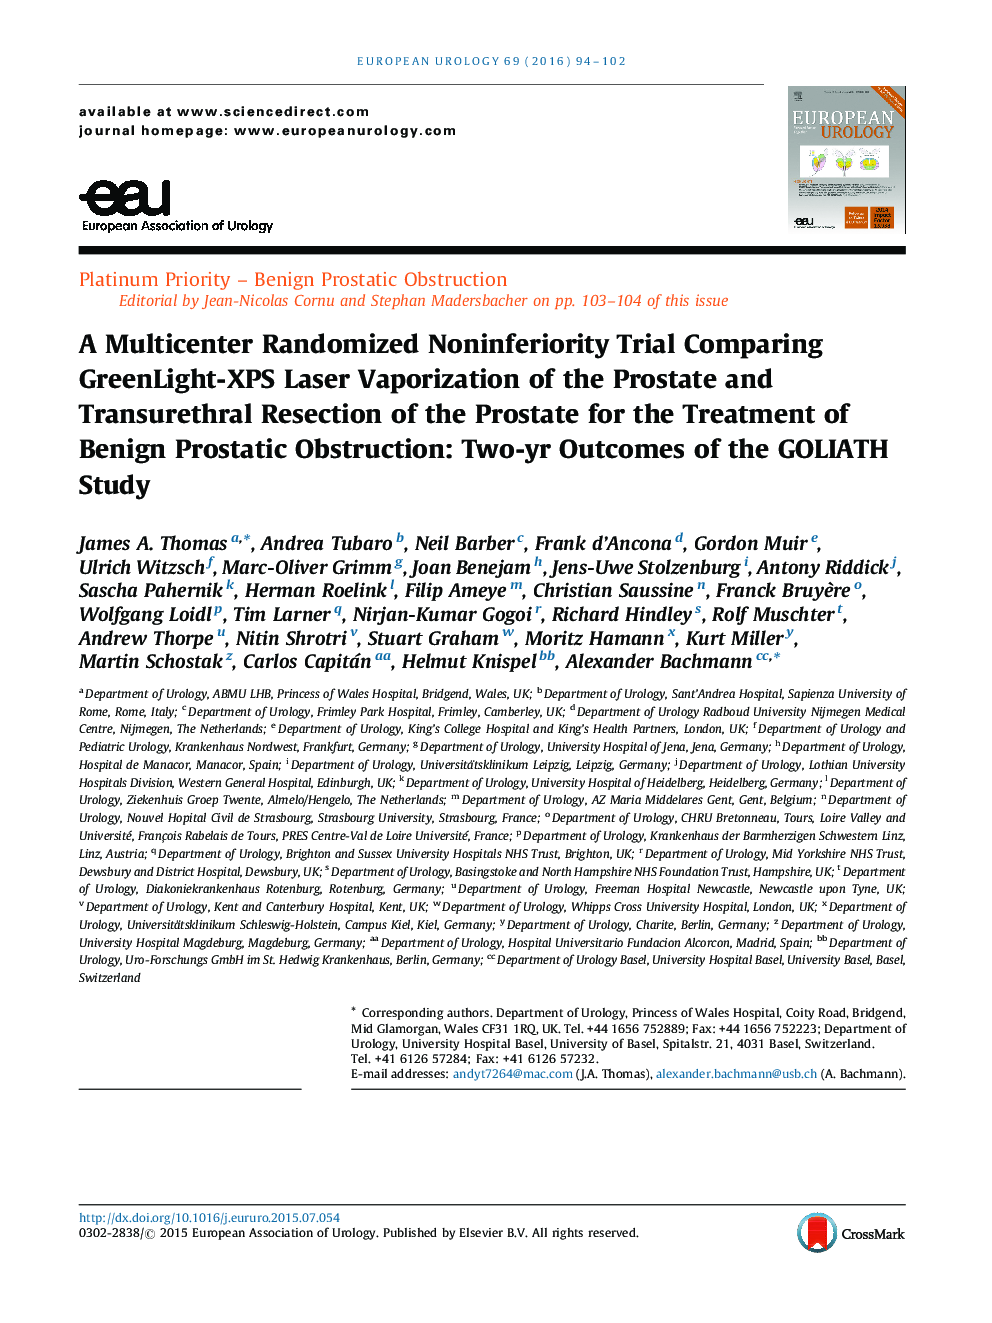 A Multicenter Randomized Noninferiority Trial Comparing GreenLight-XPS Laser Vaporization of the Prostate and Transurethral Resection of the Prostate for the Treatment of Benign Prostatic Obstruction: Two-yr Outcomes of the GOLIATH Study